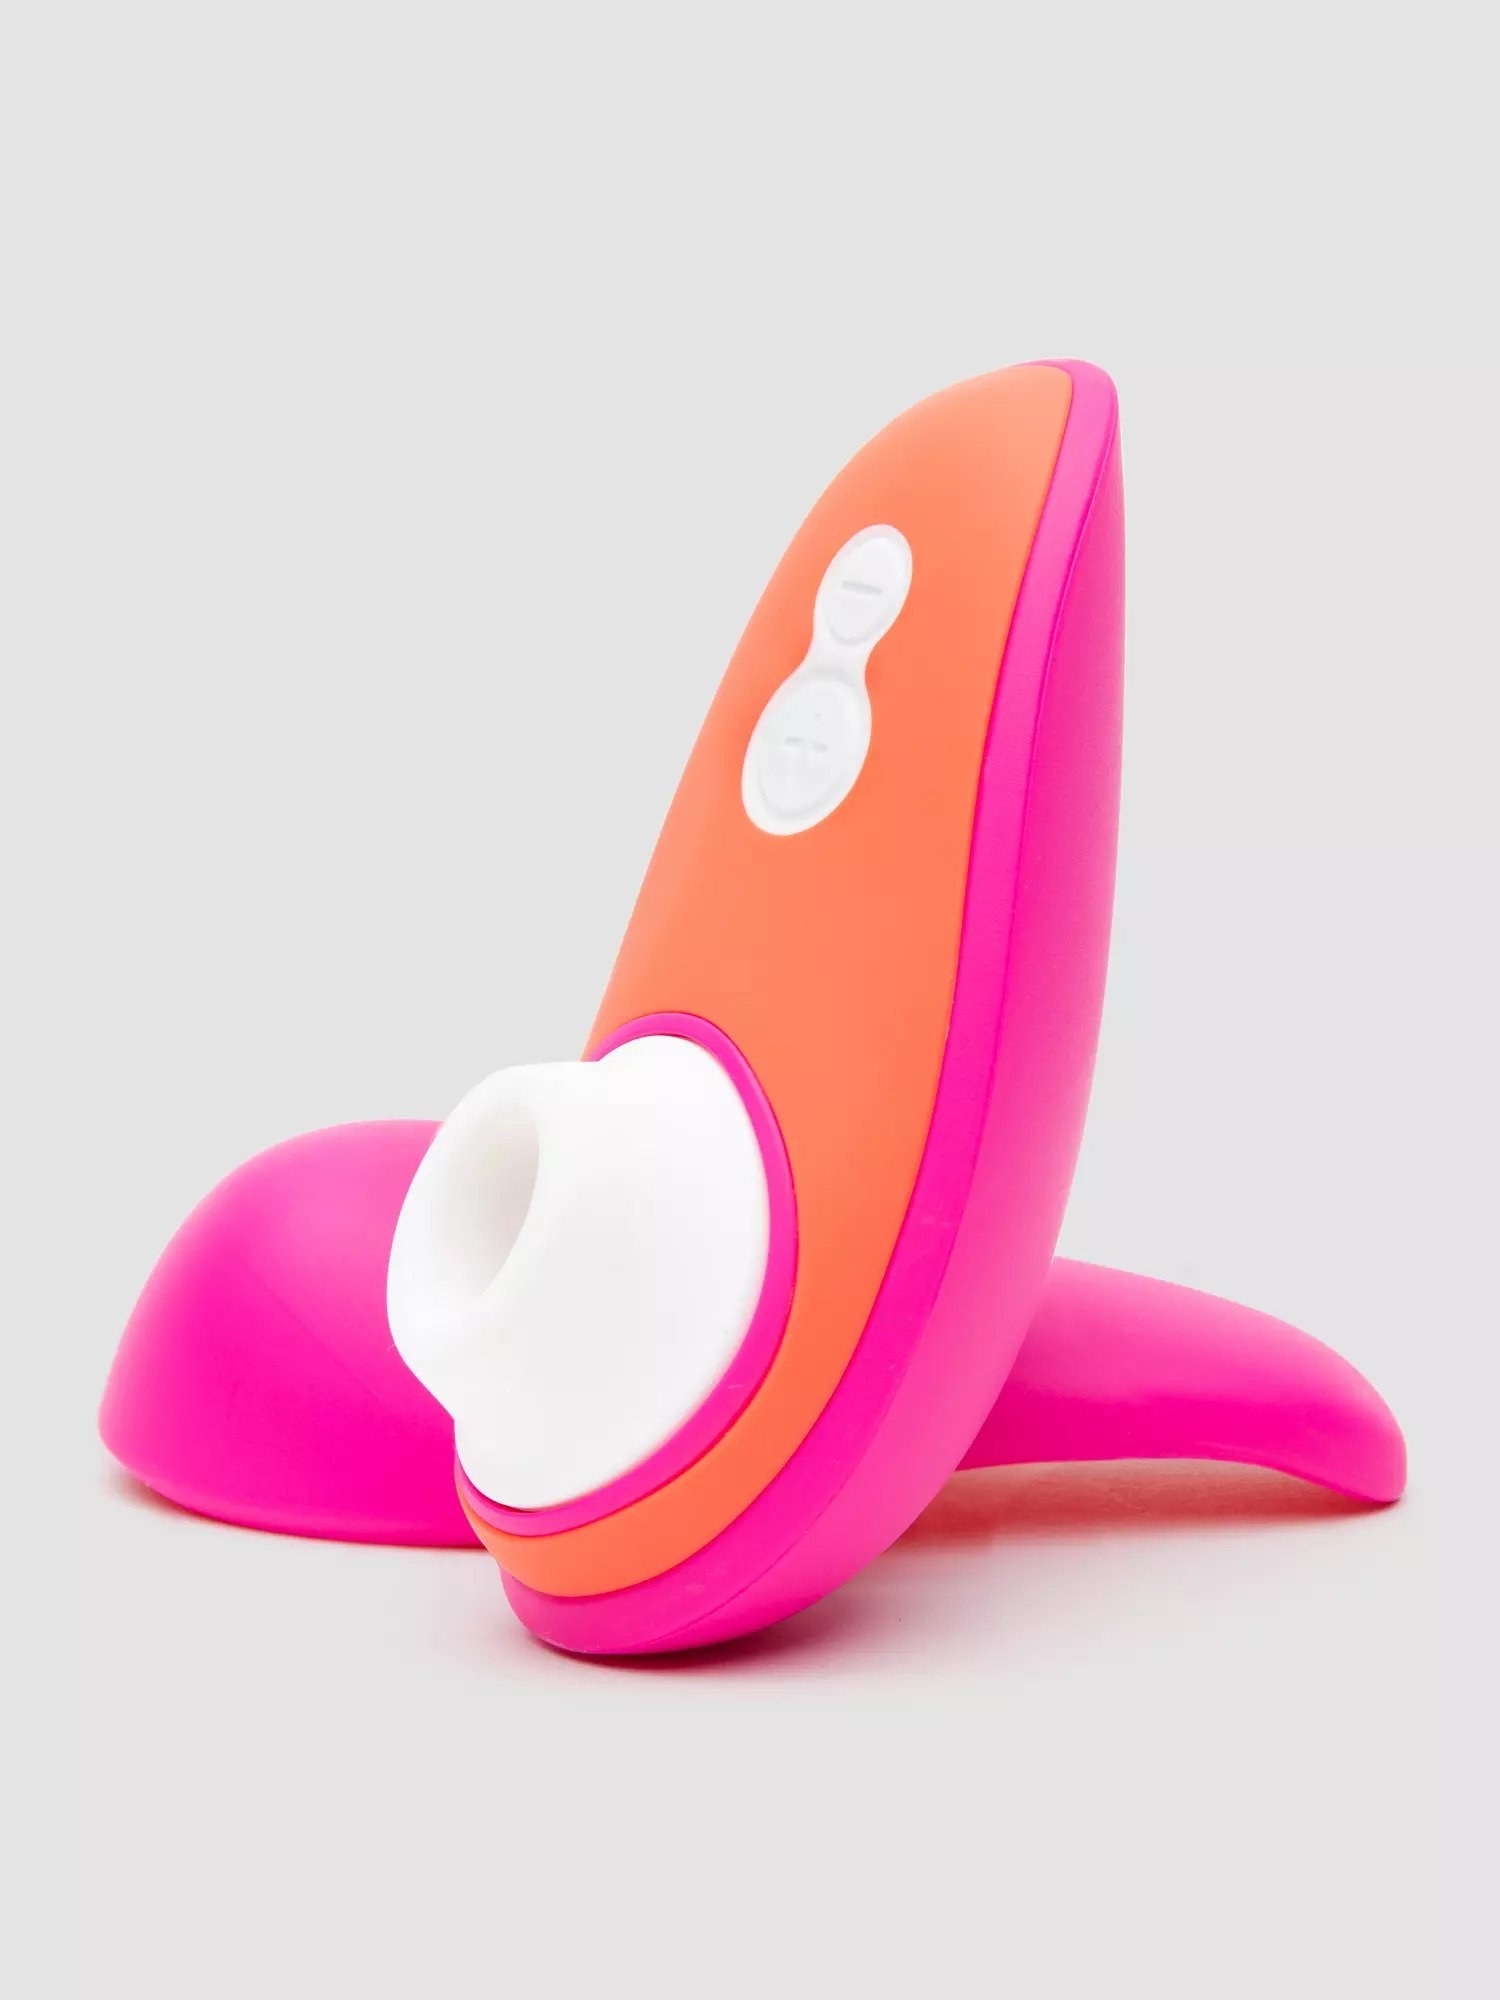 Orange and hot pink suction vibrator and hot pink travel cover